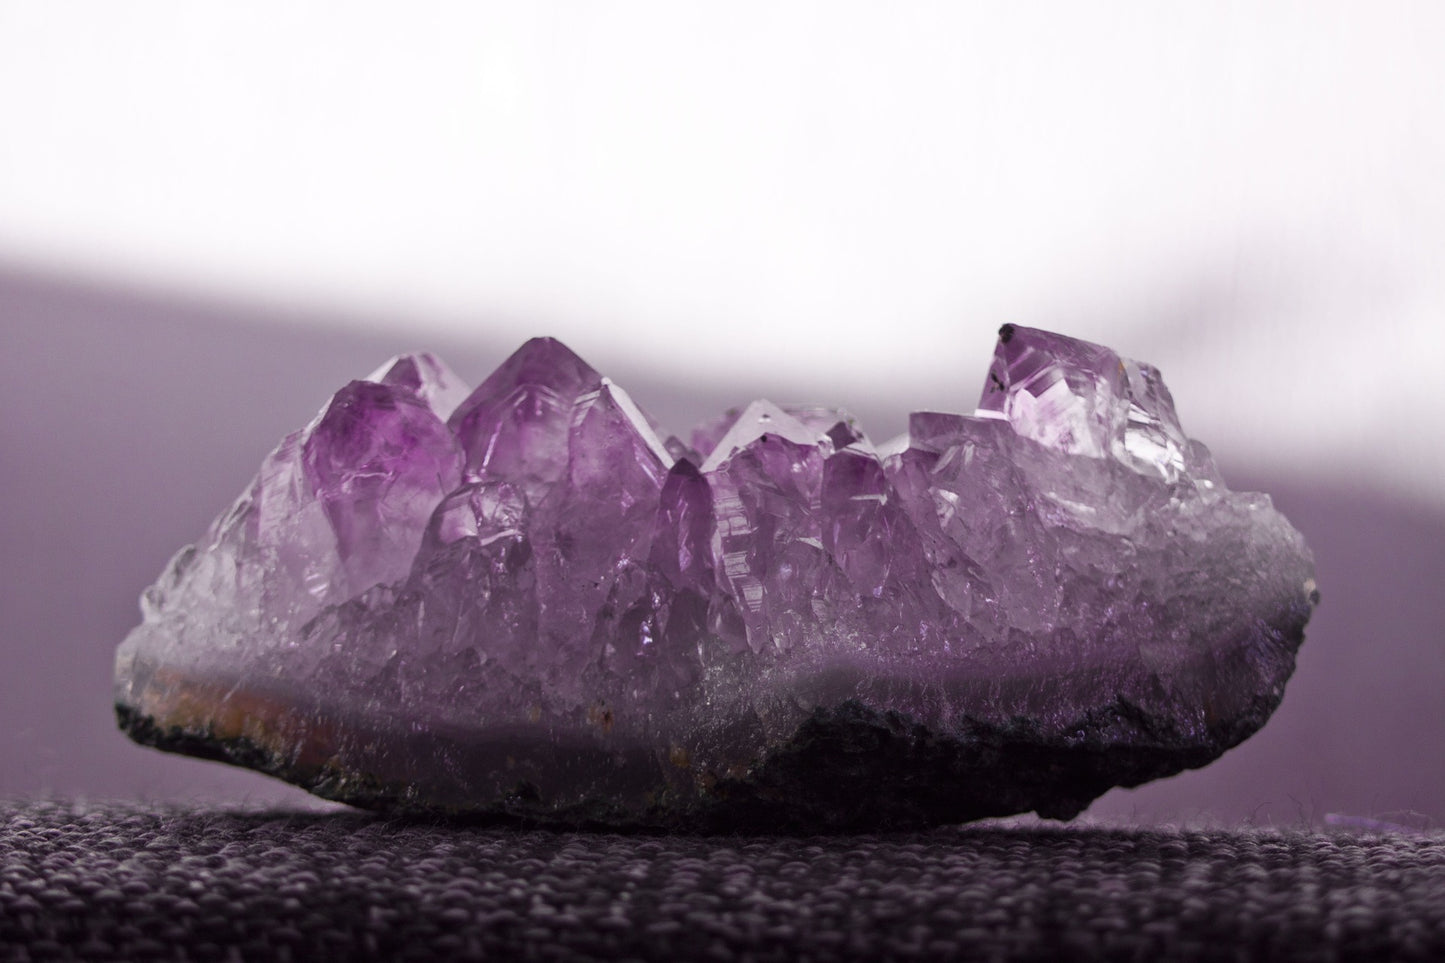 What is amethyst used for other than jewelry?